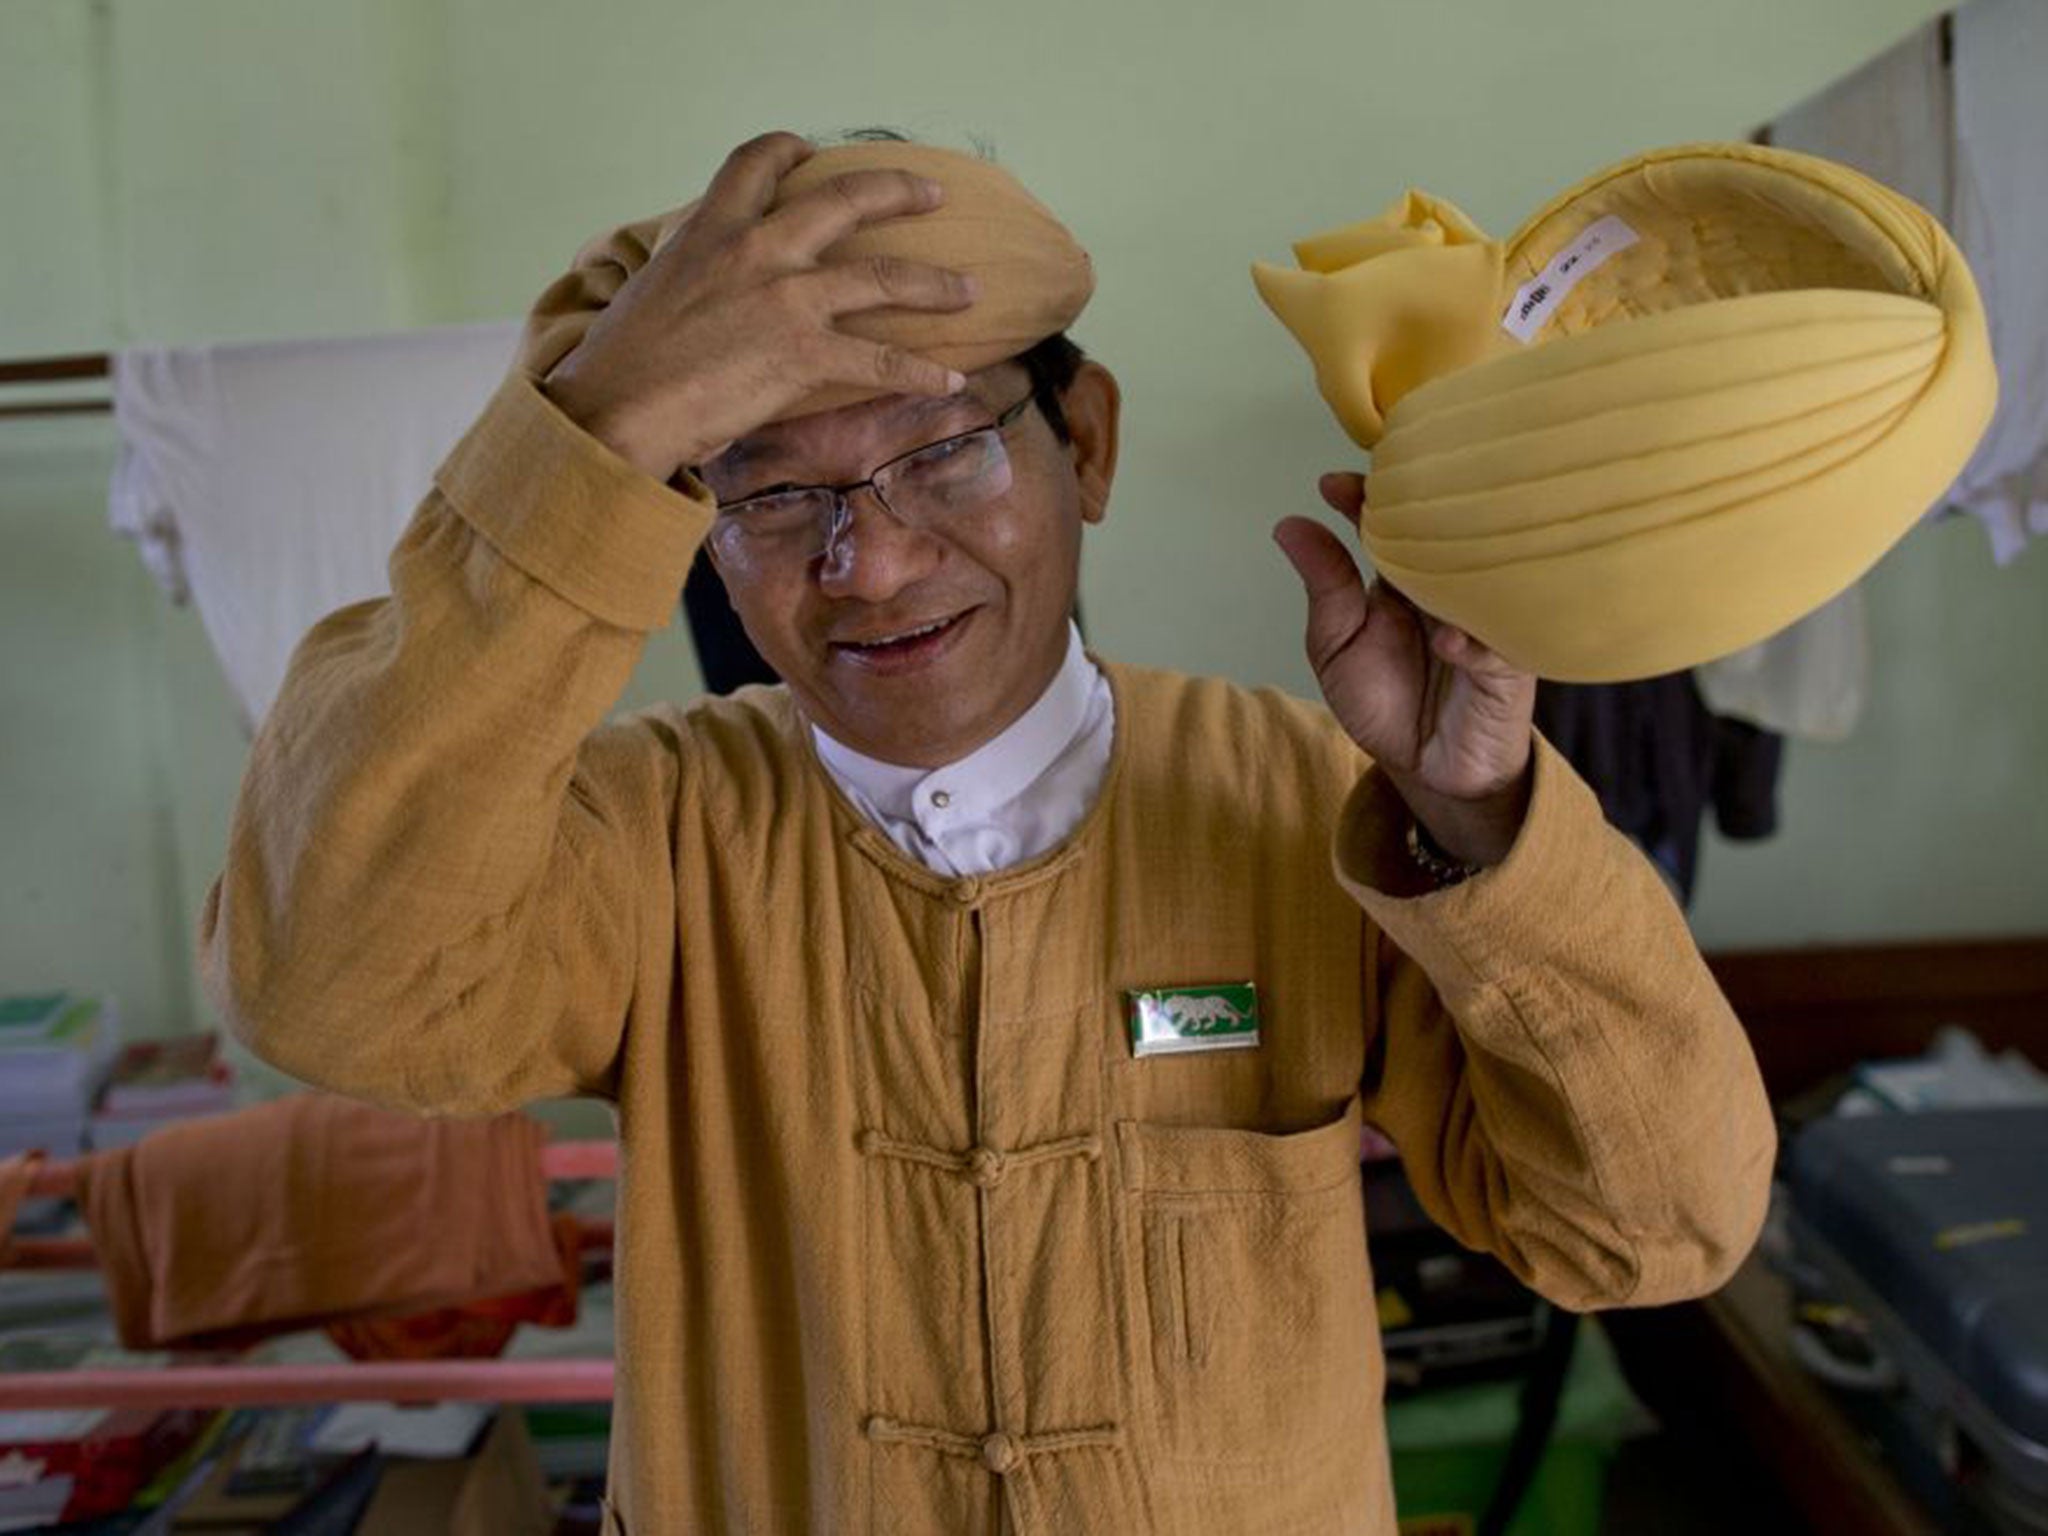 Hats off: Ye Tun, an ethnic Burman and a member of Myanmarís Lower House, dons a cotton hat while holding a silk one – just some of the head pieces seen in Parliament